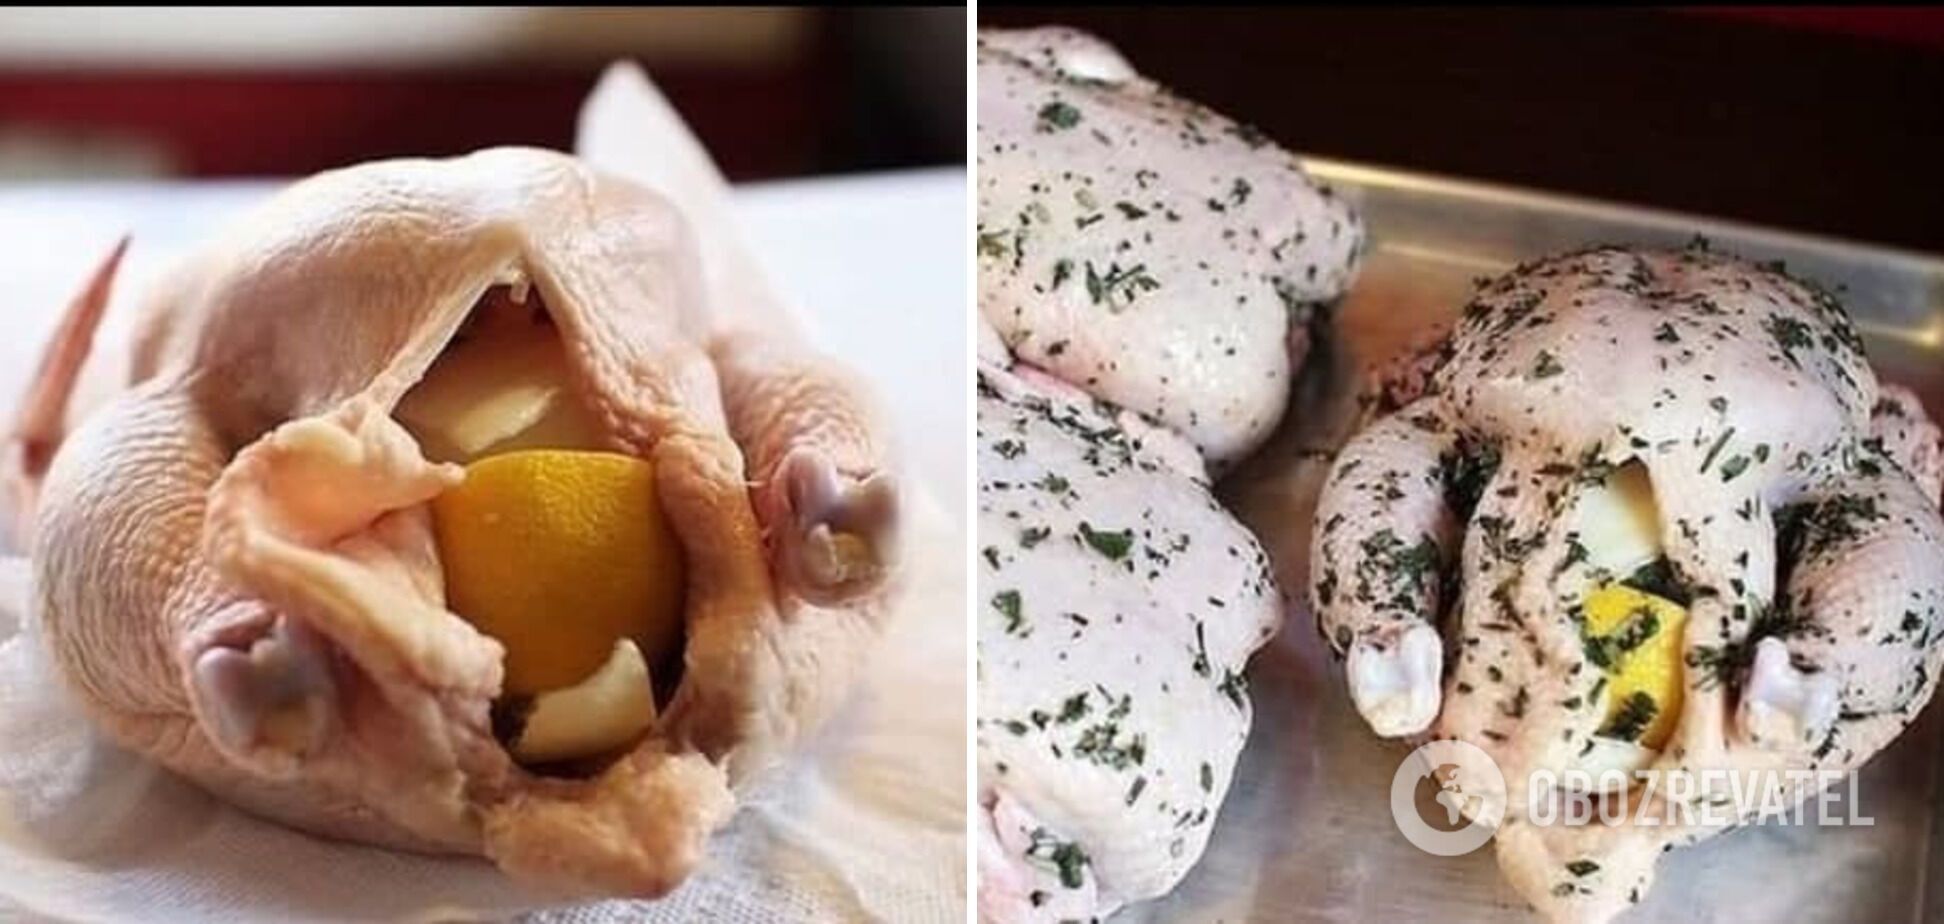 Stuffing chicken with lemons